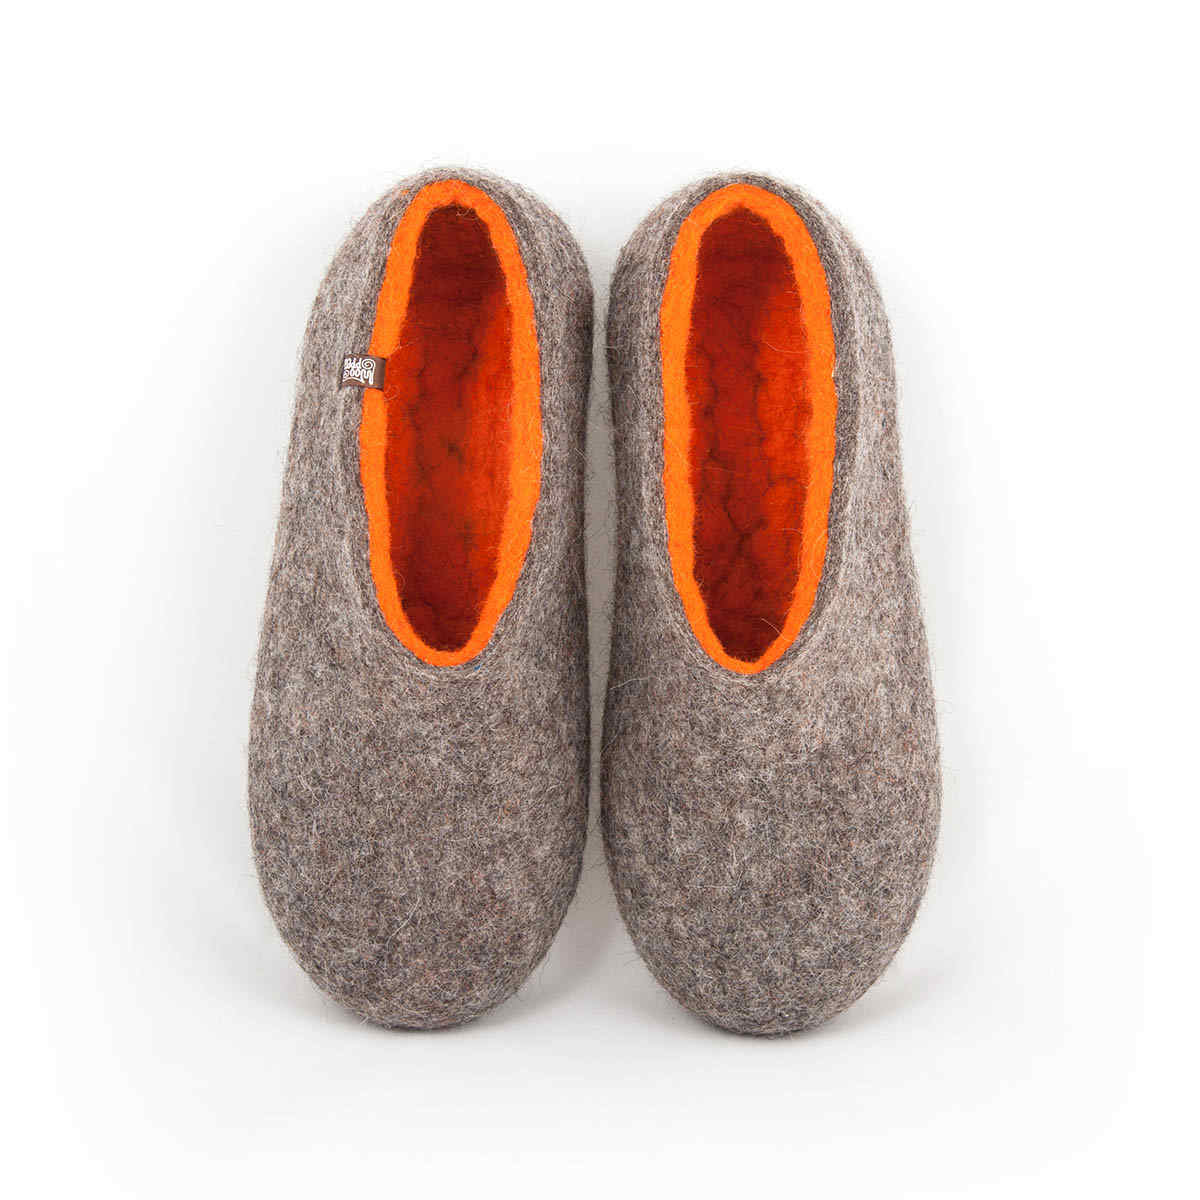 Boiled wool slippers from the DUAL 